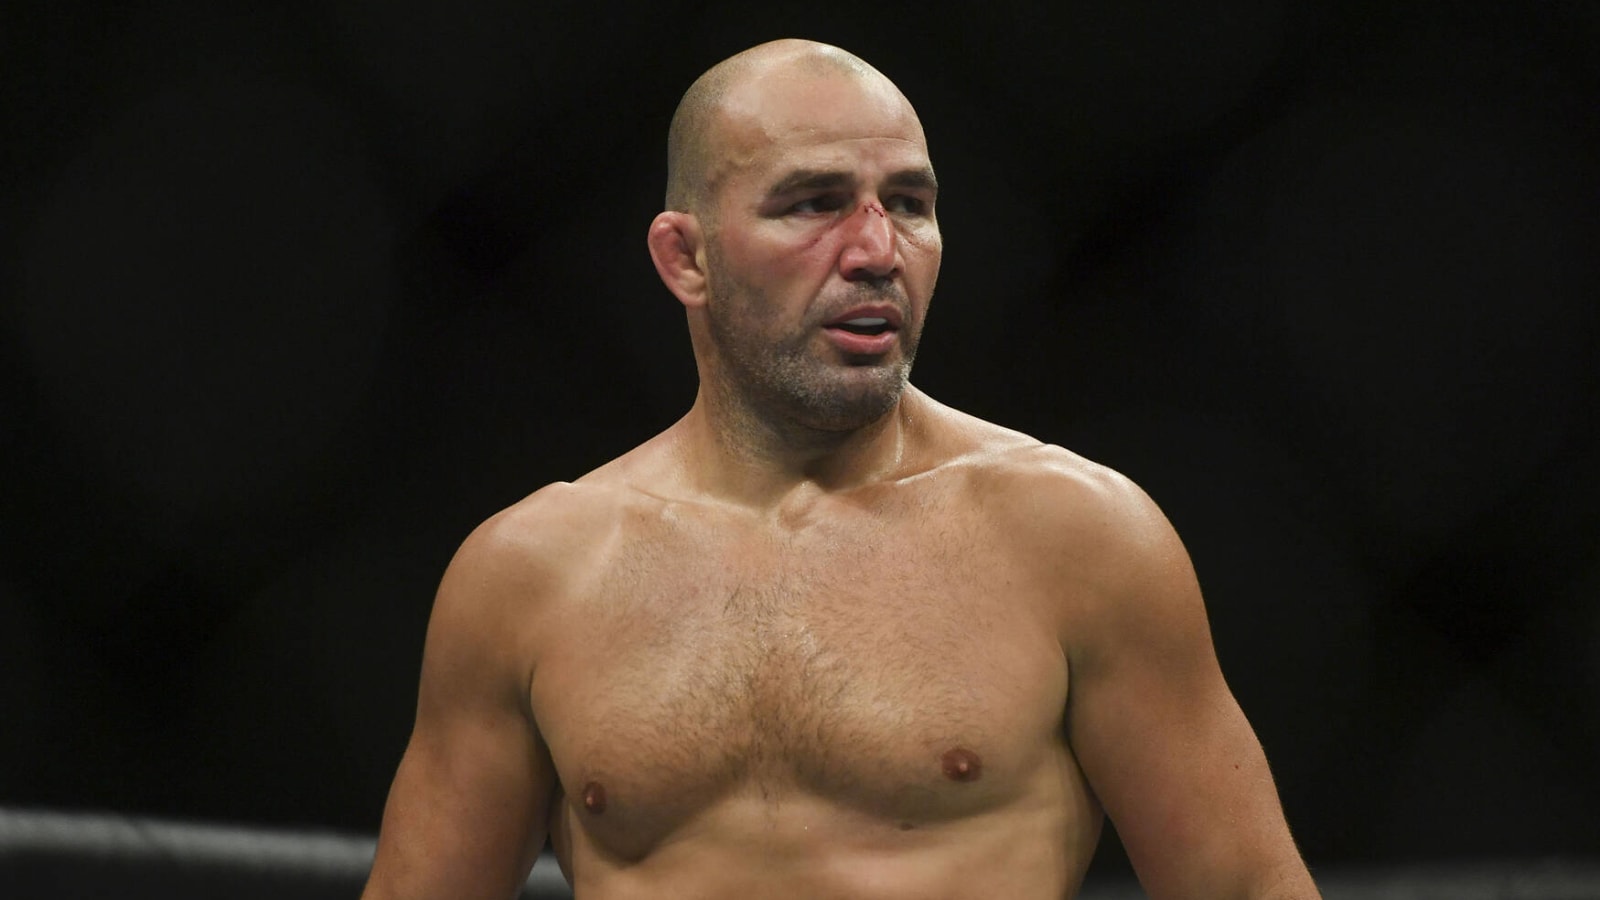 Champion Glover Teixeira says 2022 is his final year in MMA